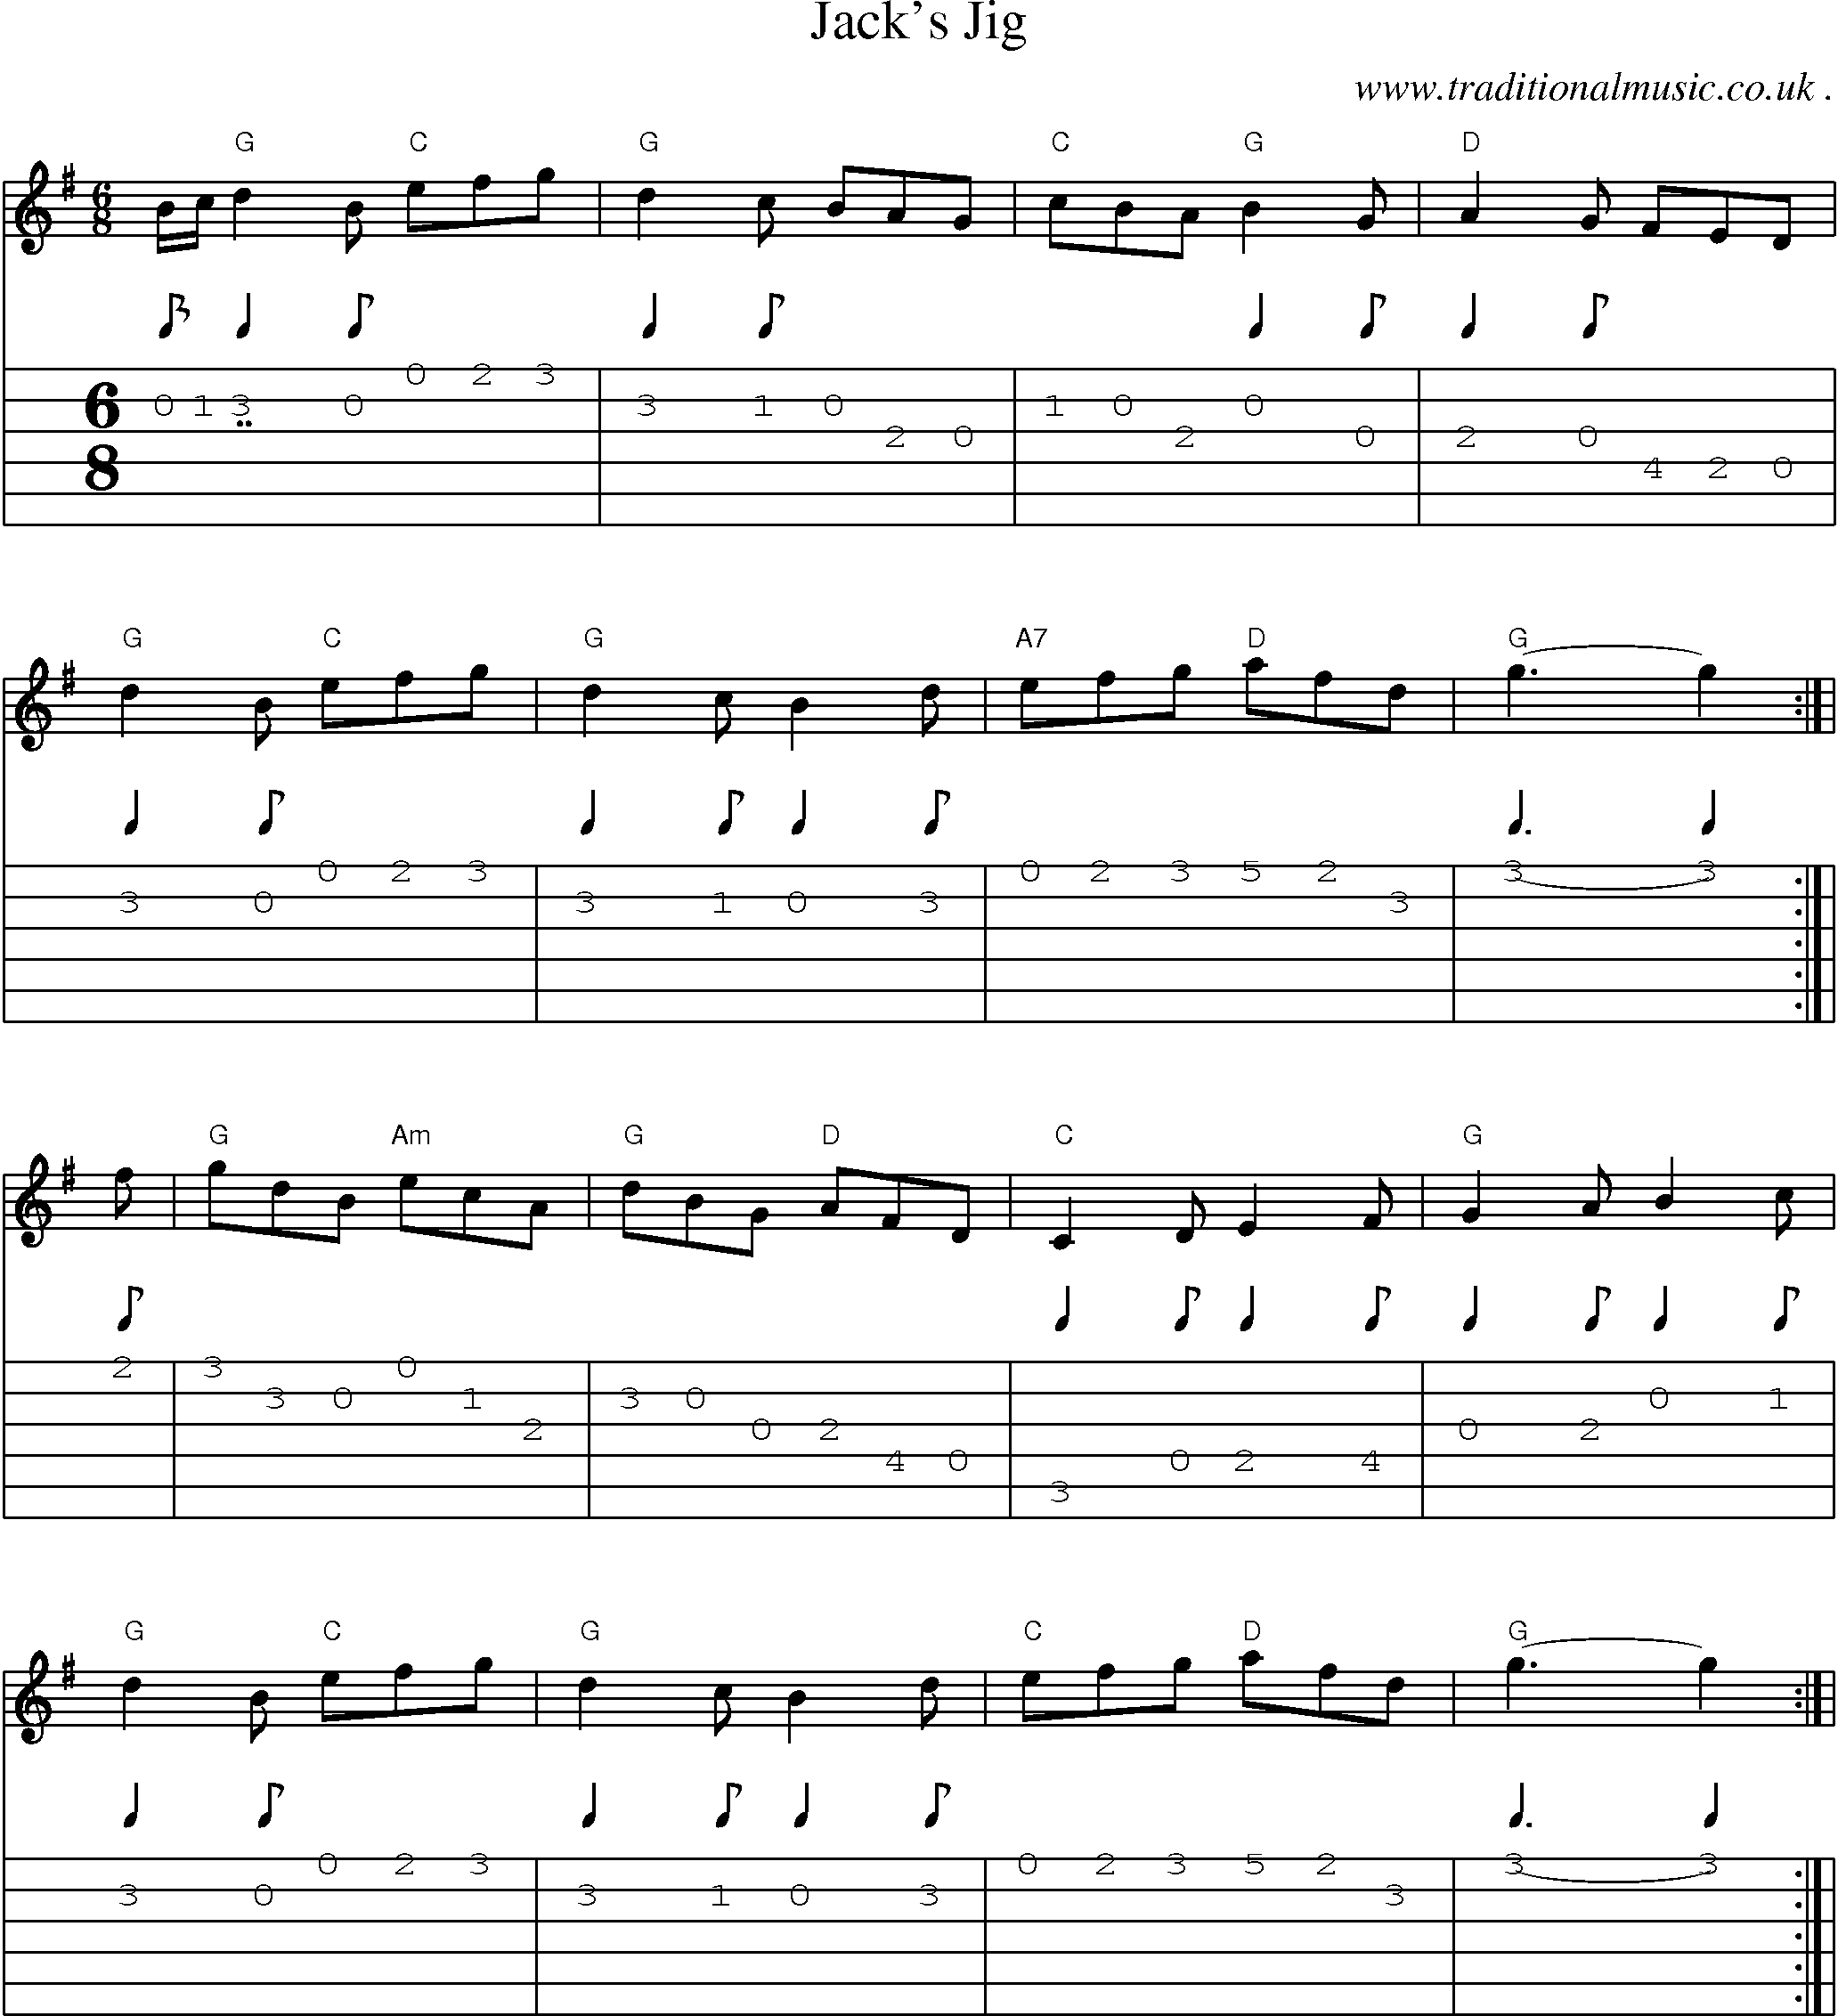 Sheet-music  score, Chords and Guitar Tabs for Jacks Jig